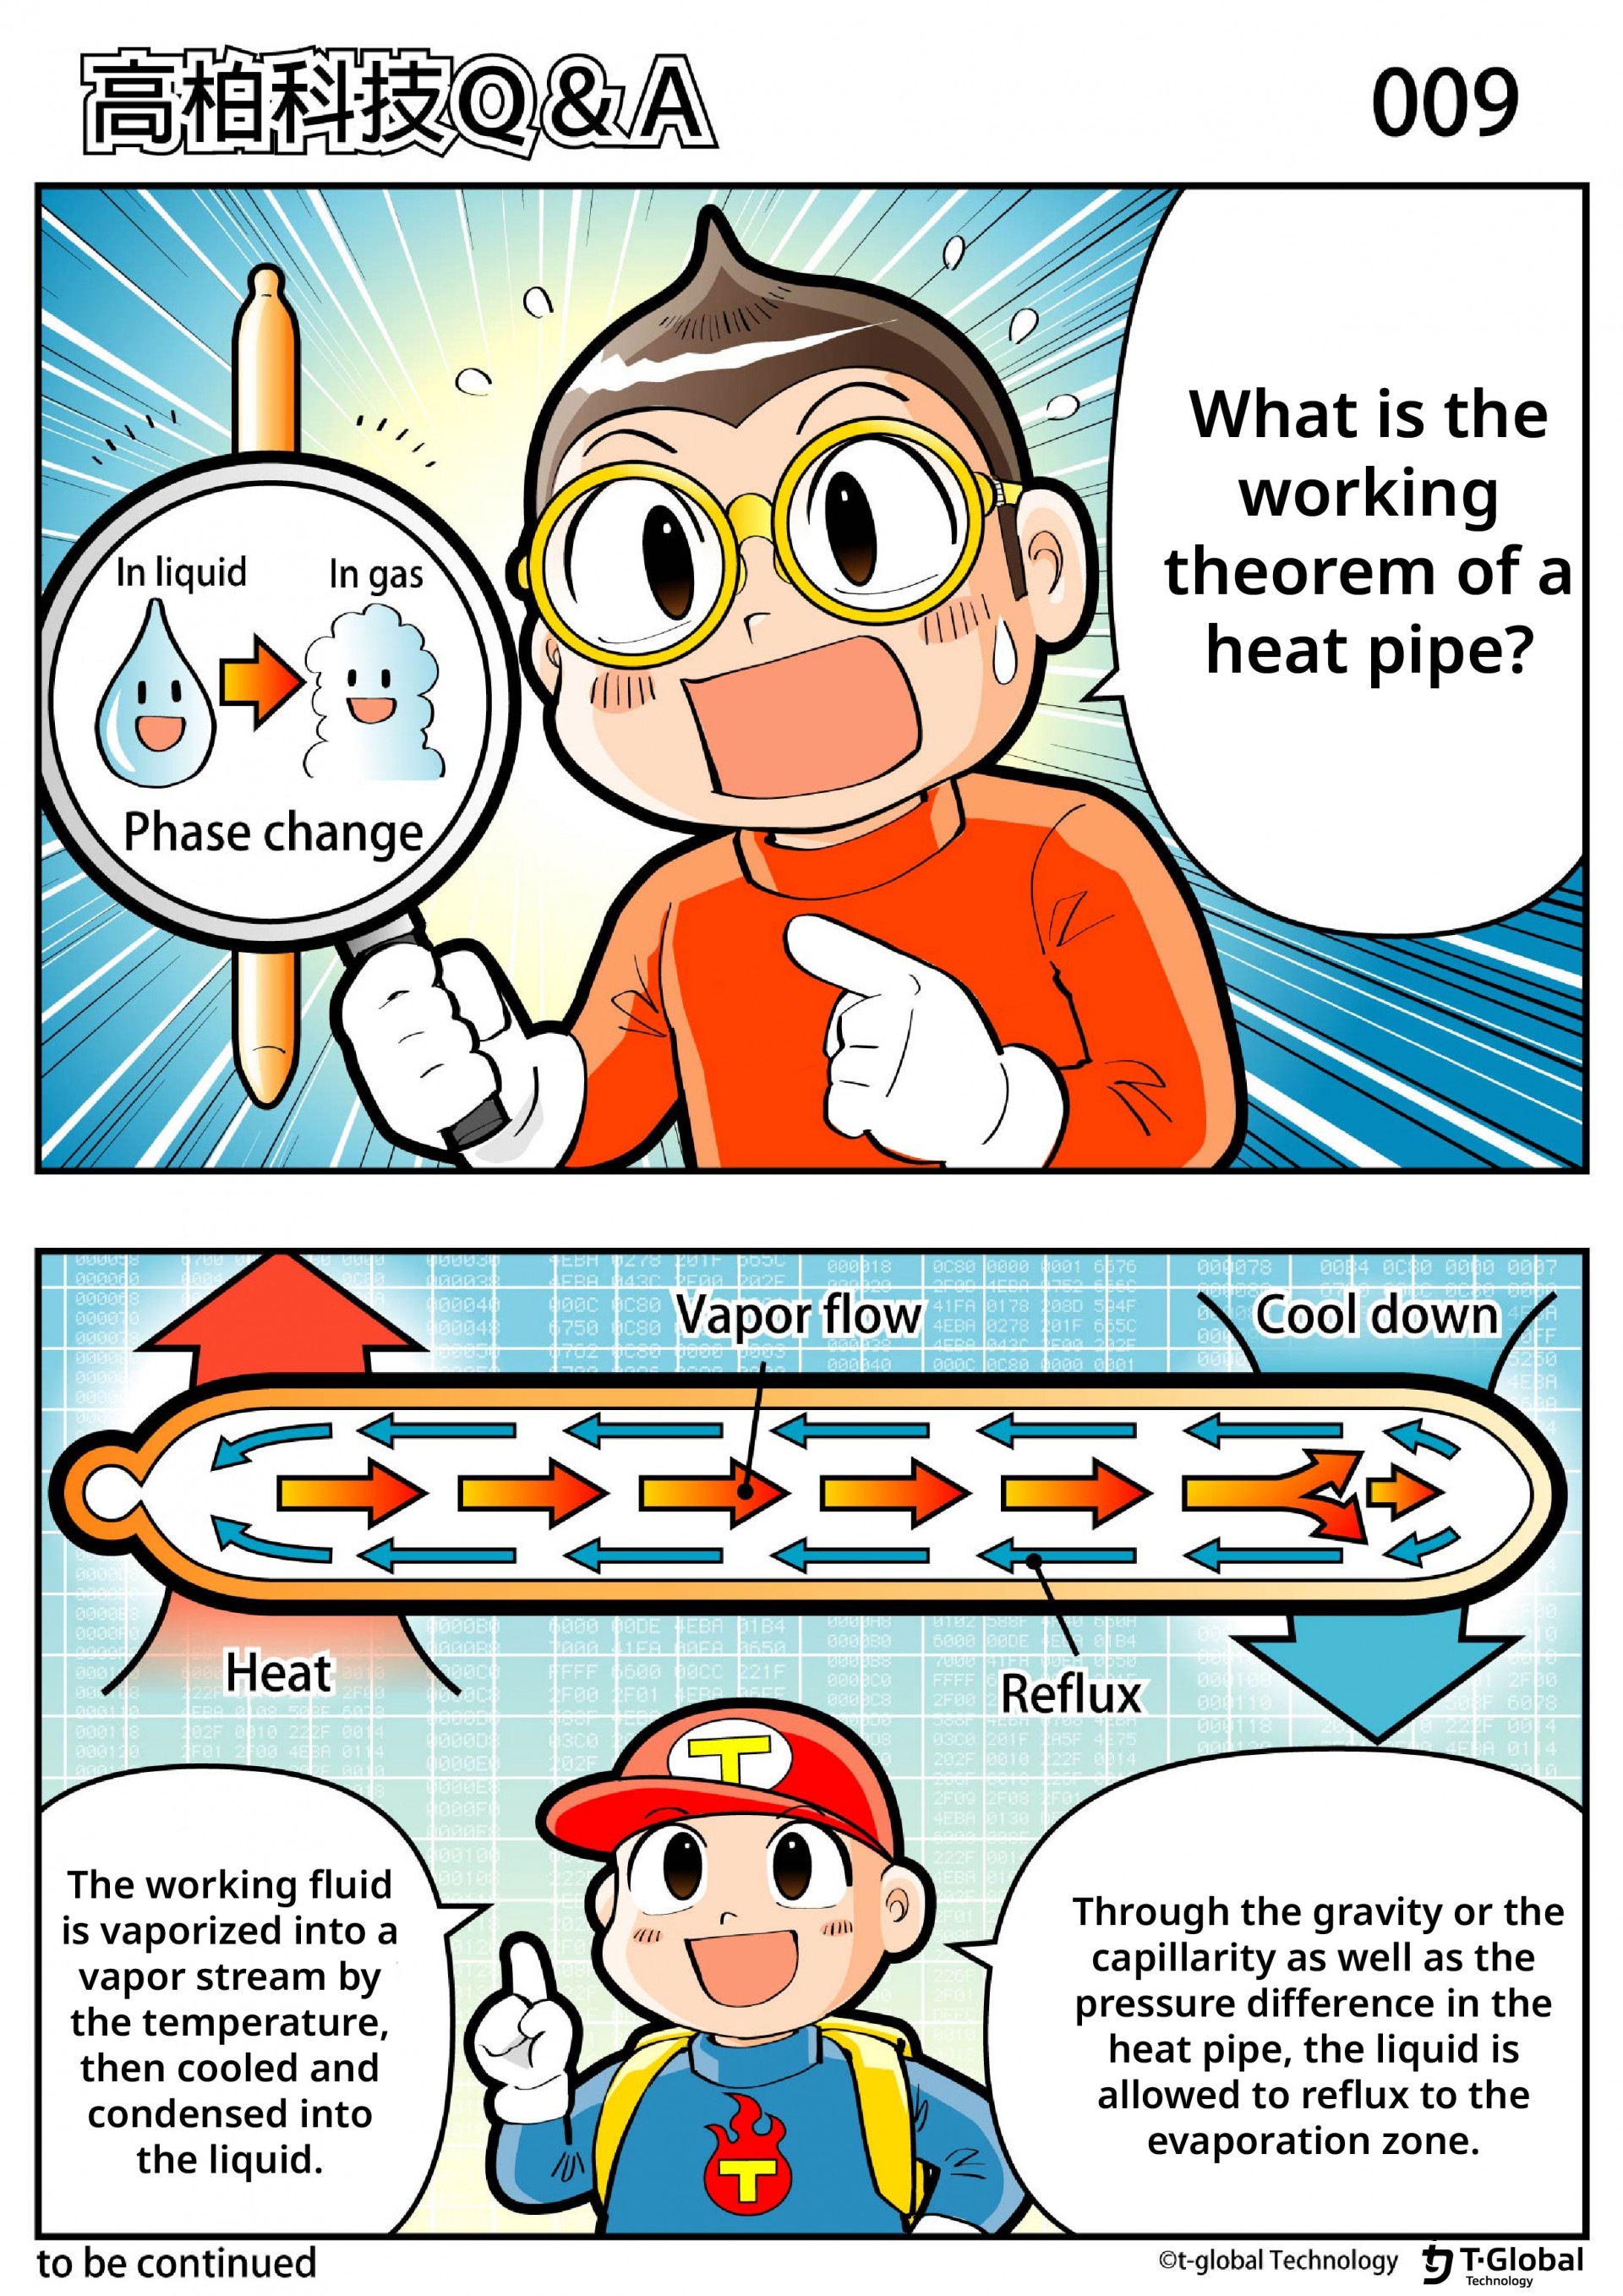 What is the workinig theorem of a heatpipe?